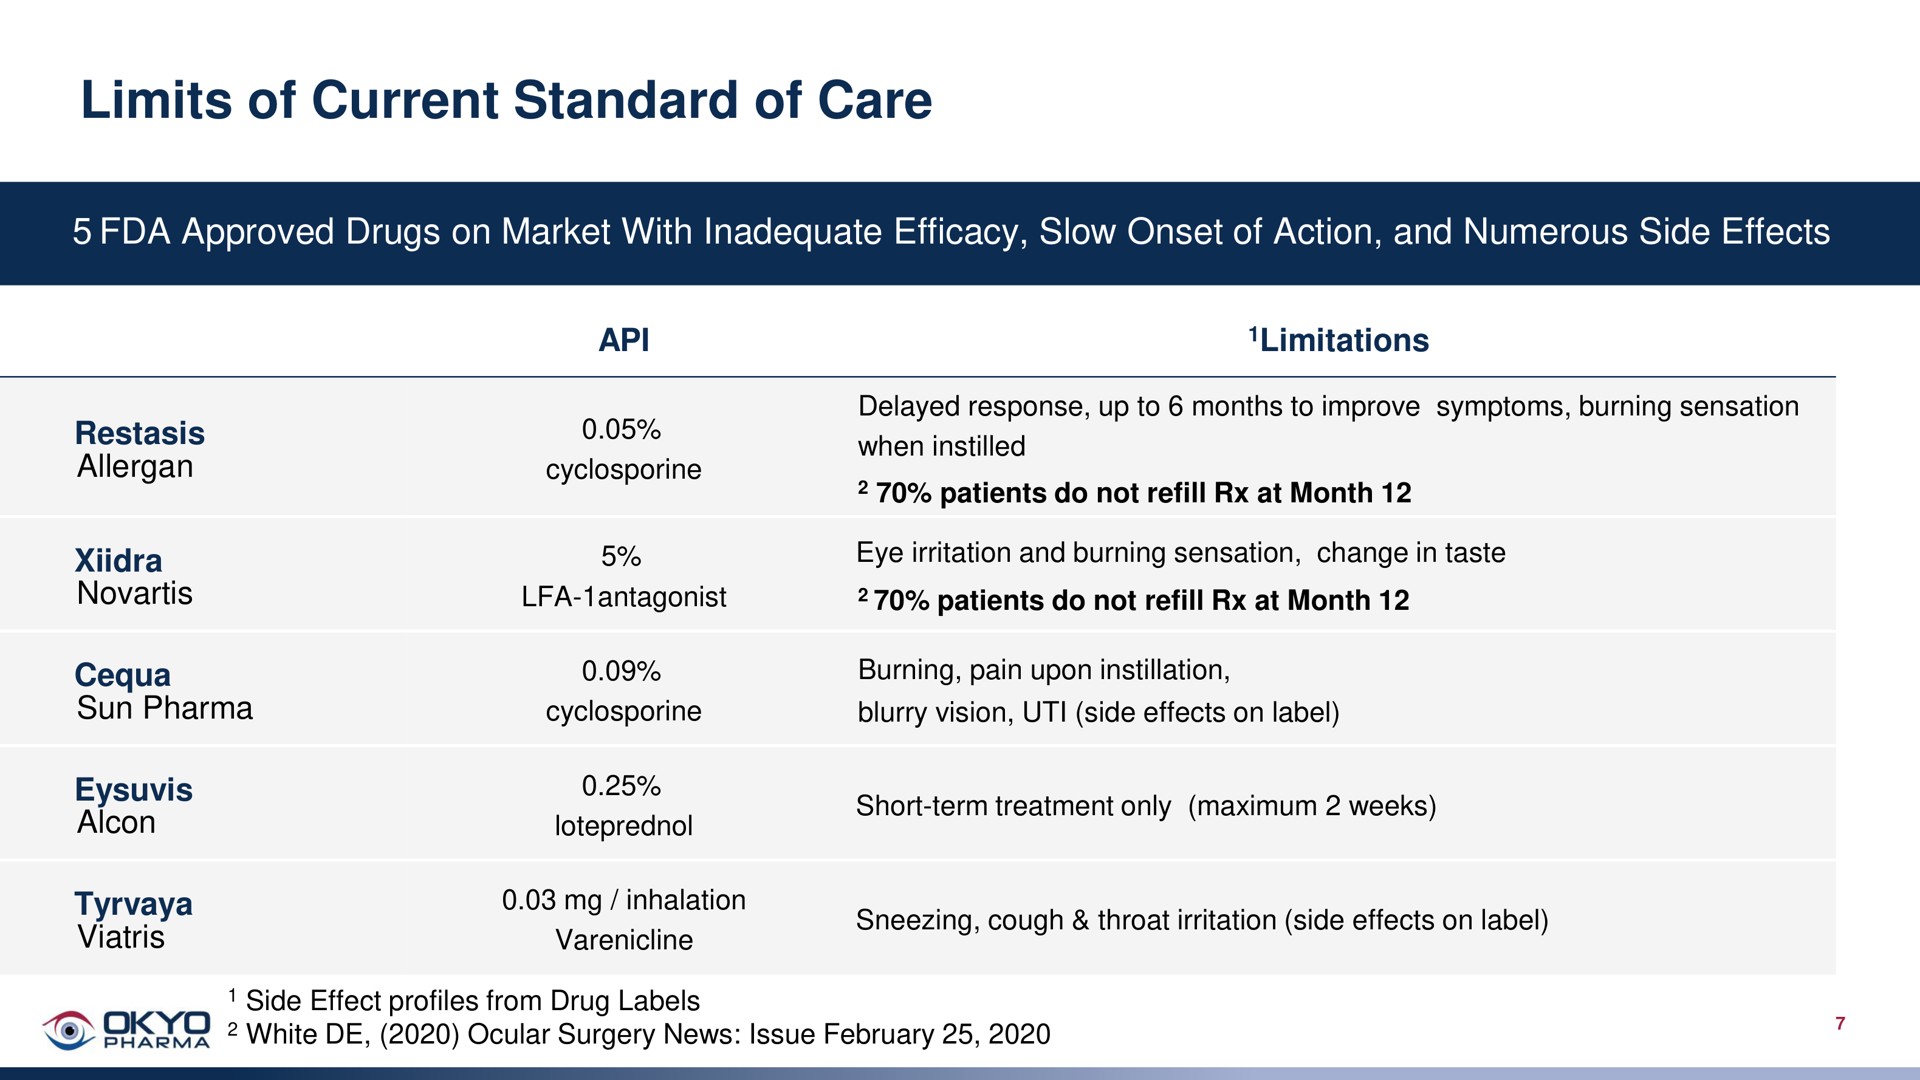 limits of current standard of care | OKYO Pharma